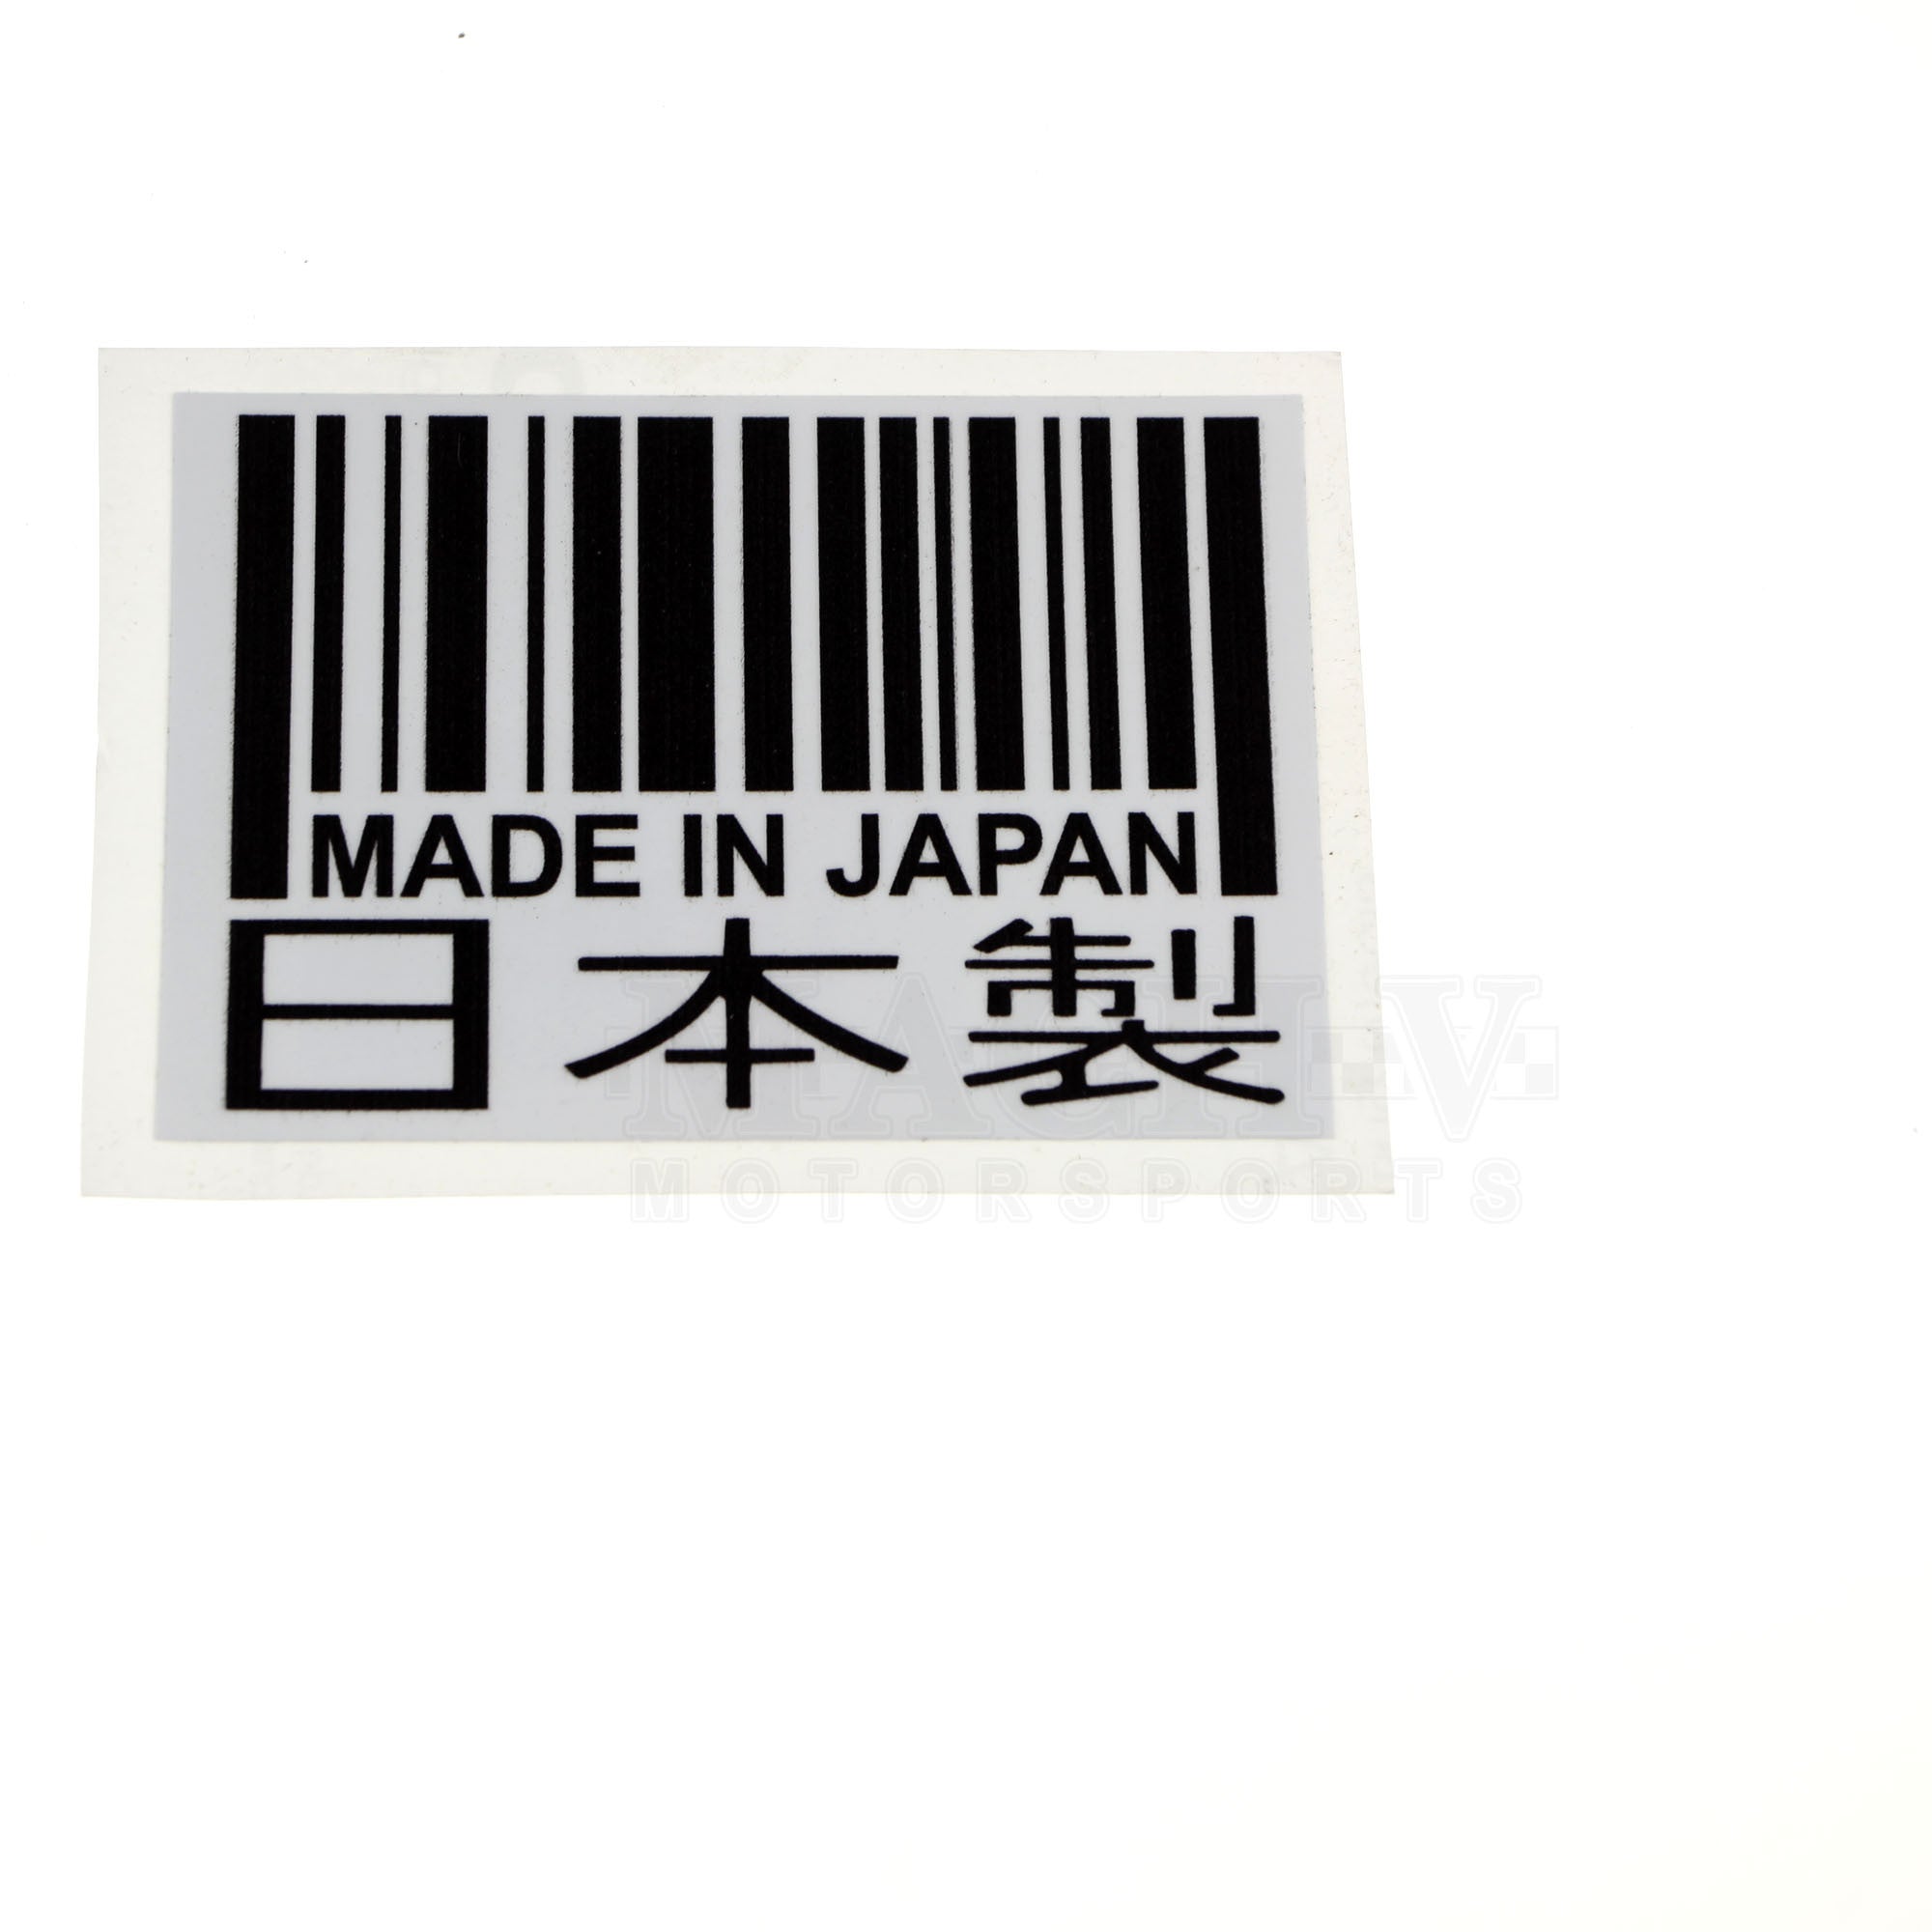 Made in Japan Decal